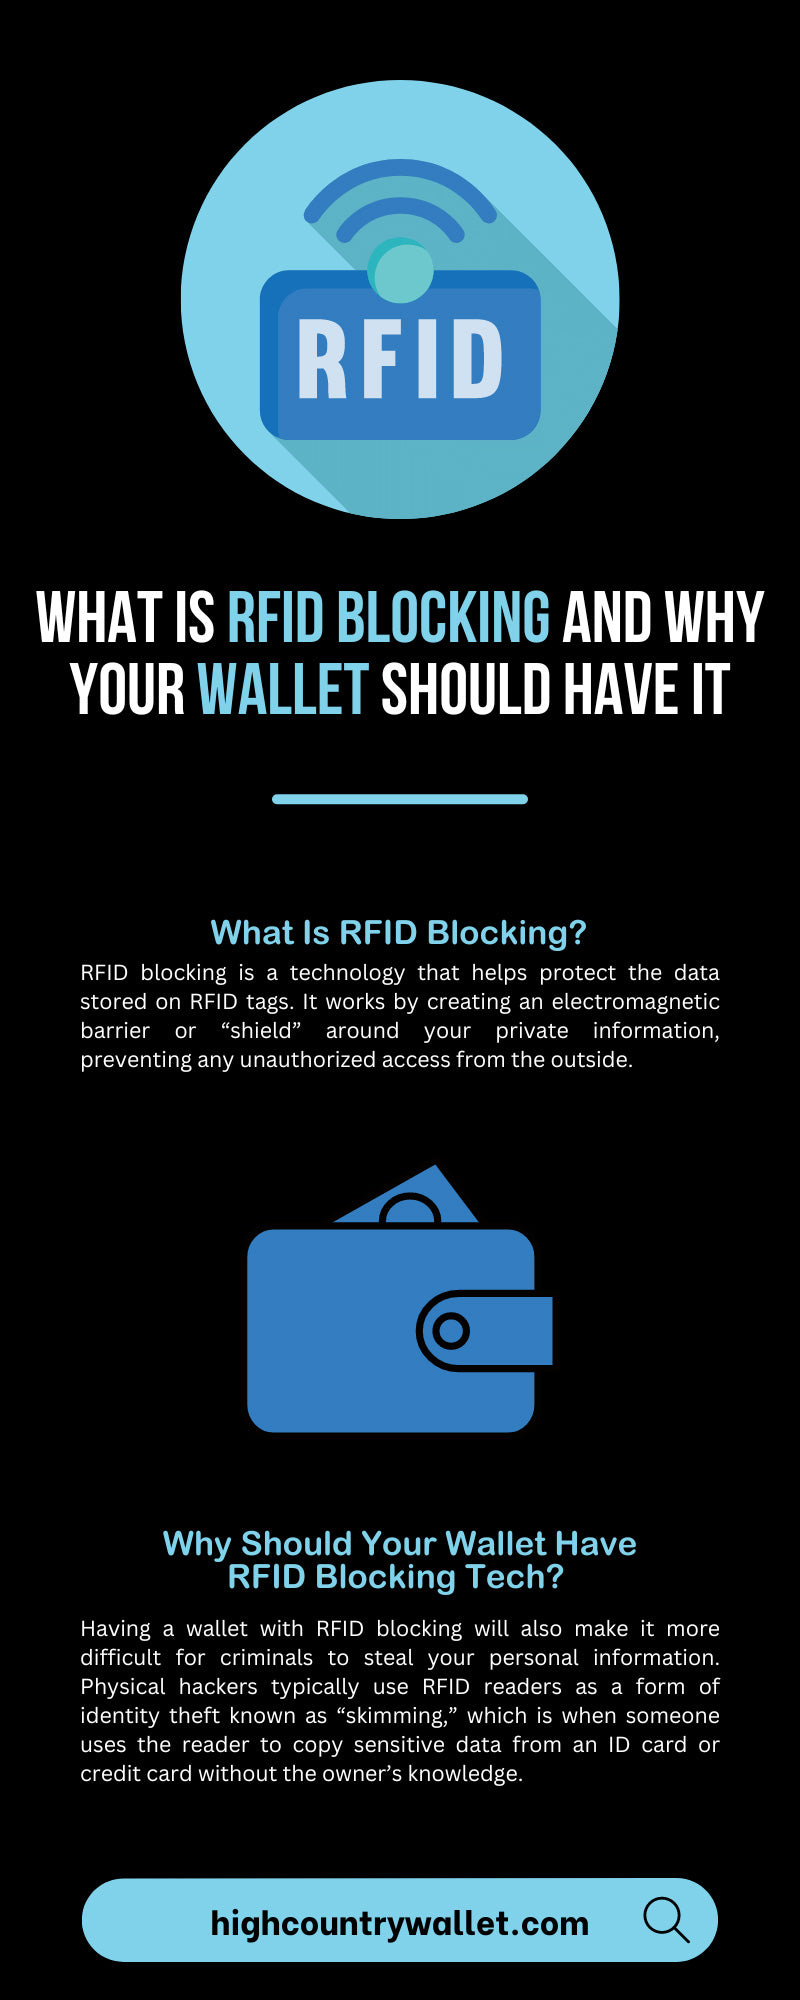 What Is RFID Blocking and Why Your Wallet Should Have It